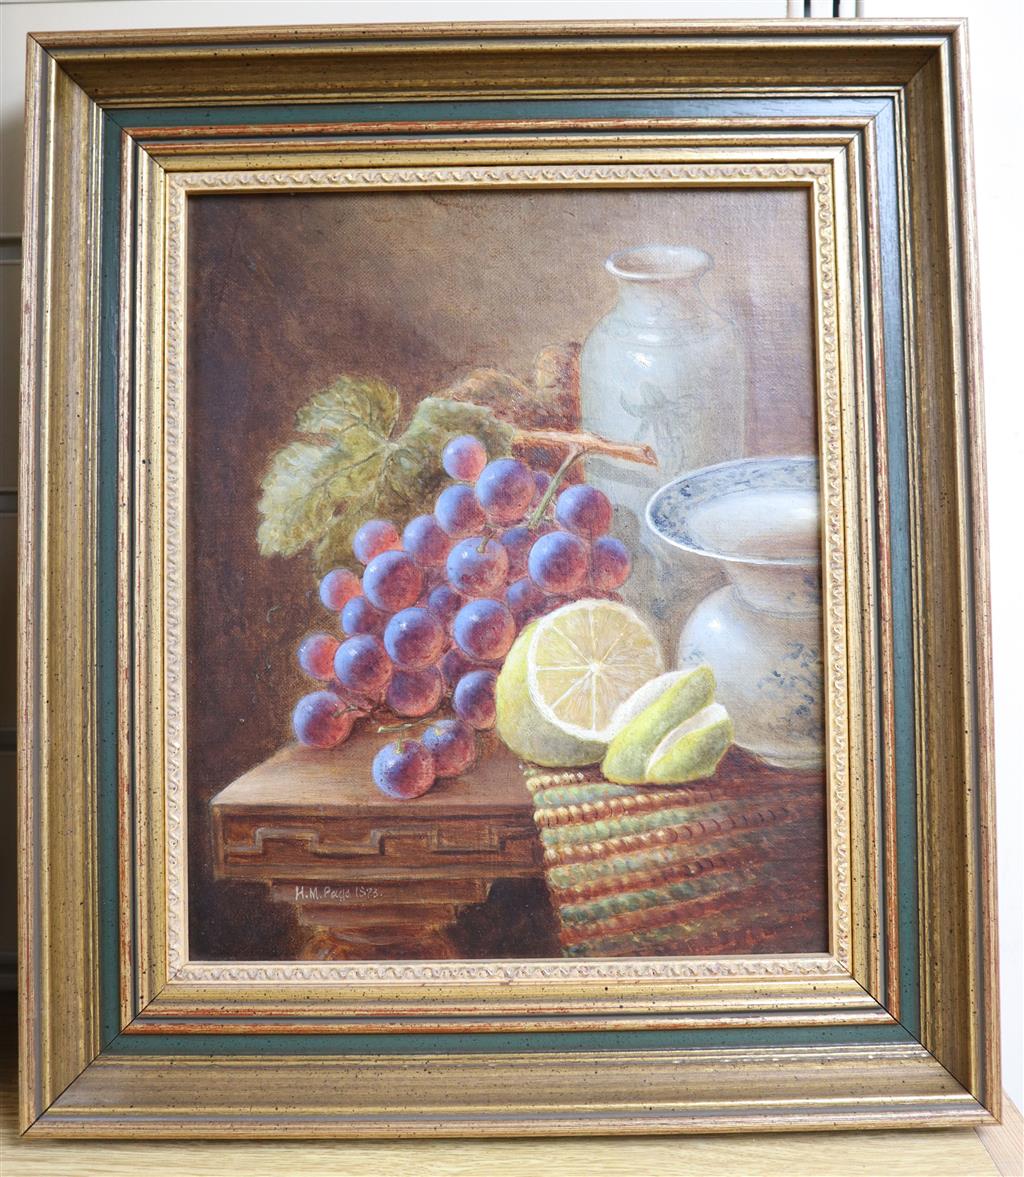 H. M. Page, Still life with grapes, lemon and vessels on a table, signed and dated 1873, 28 x 23cm